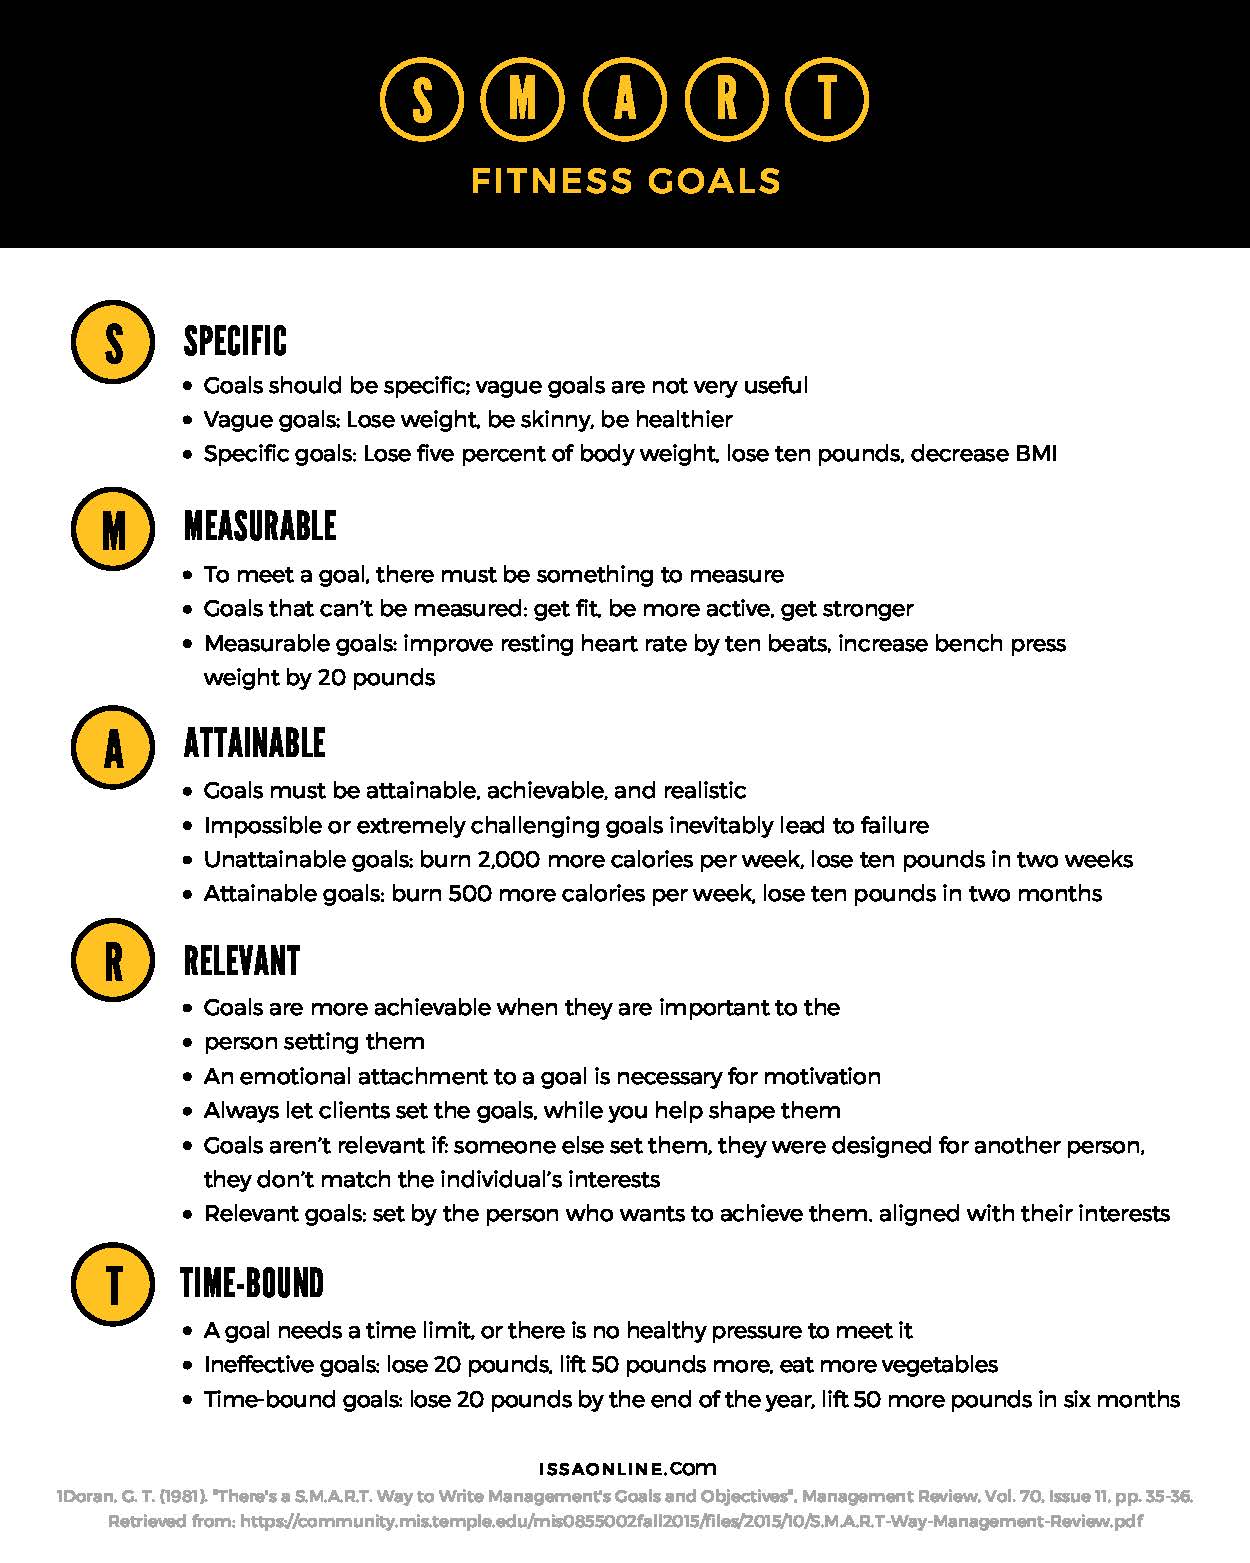 How to Set Fitness Goals You'll Actually Achieve, According to Top